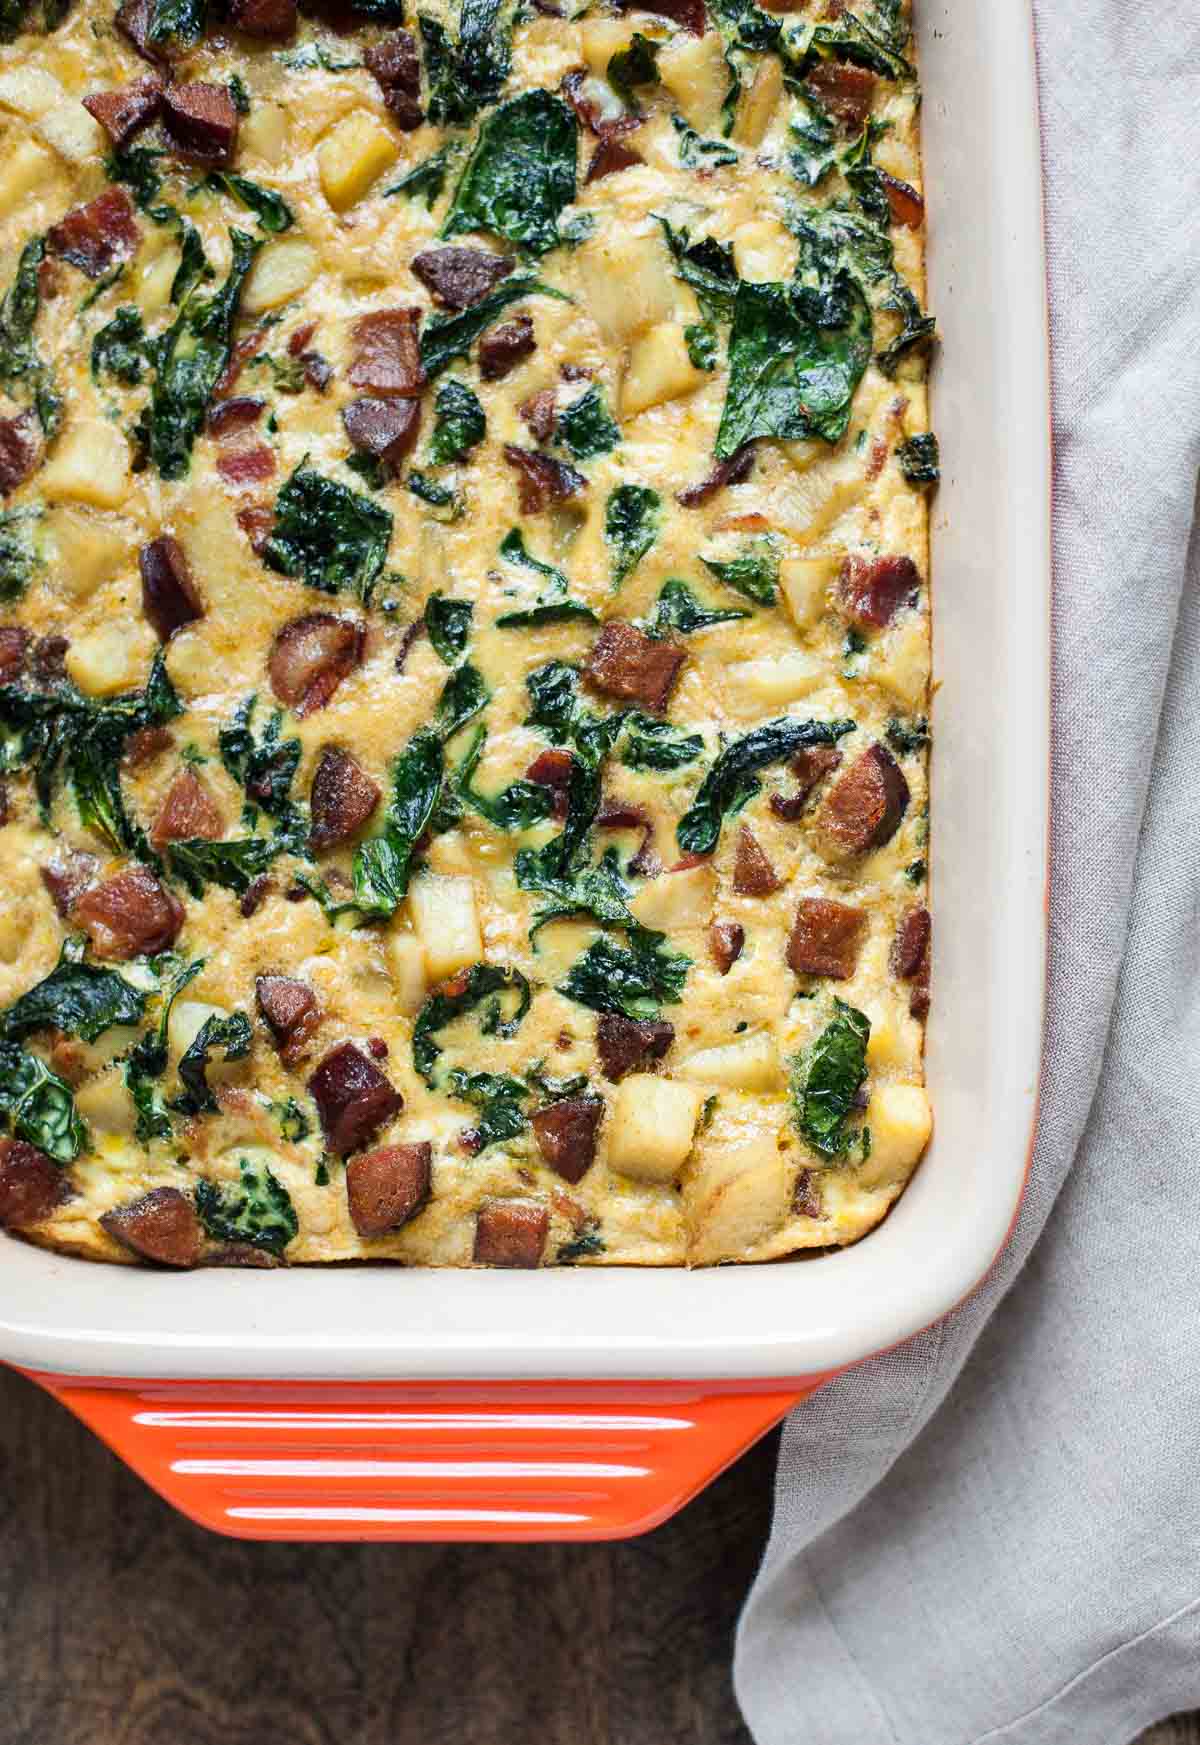 Top 15 Paleo Recipes of 2015--Breakfast Casserole with Bacon, Sausage, Sweet Potatoes, and Kale (Whole30) | acalculatedwhisk.com